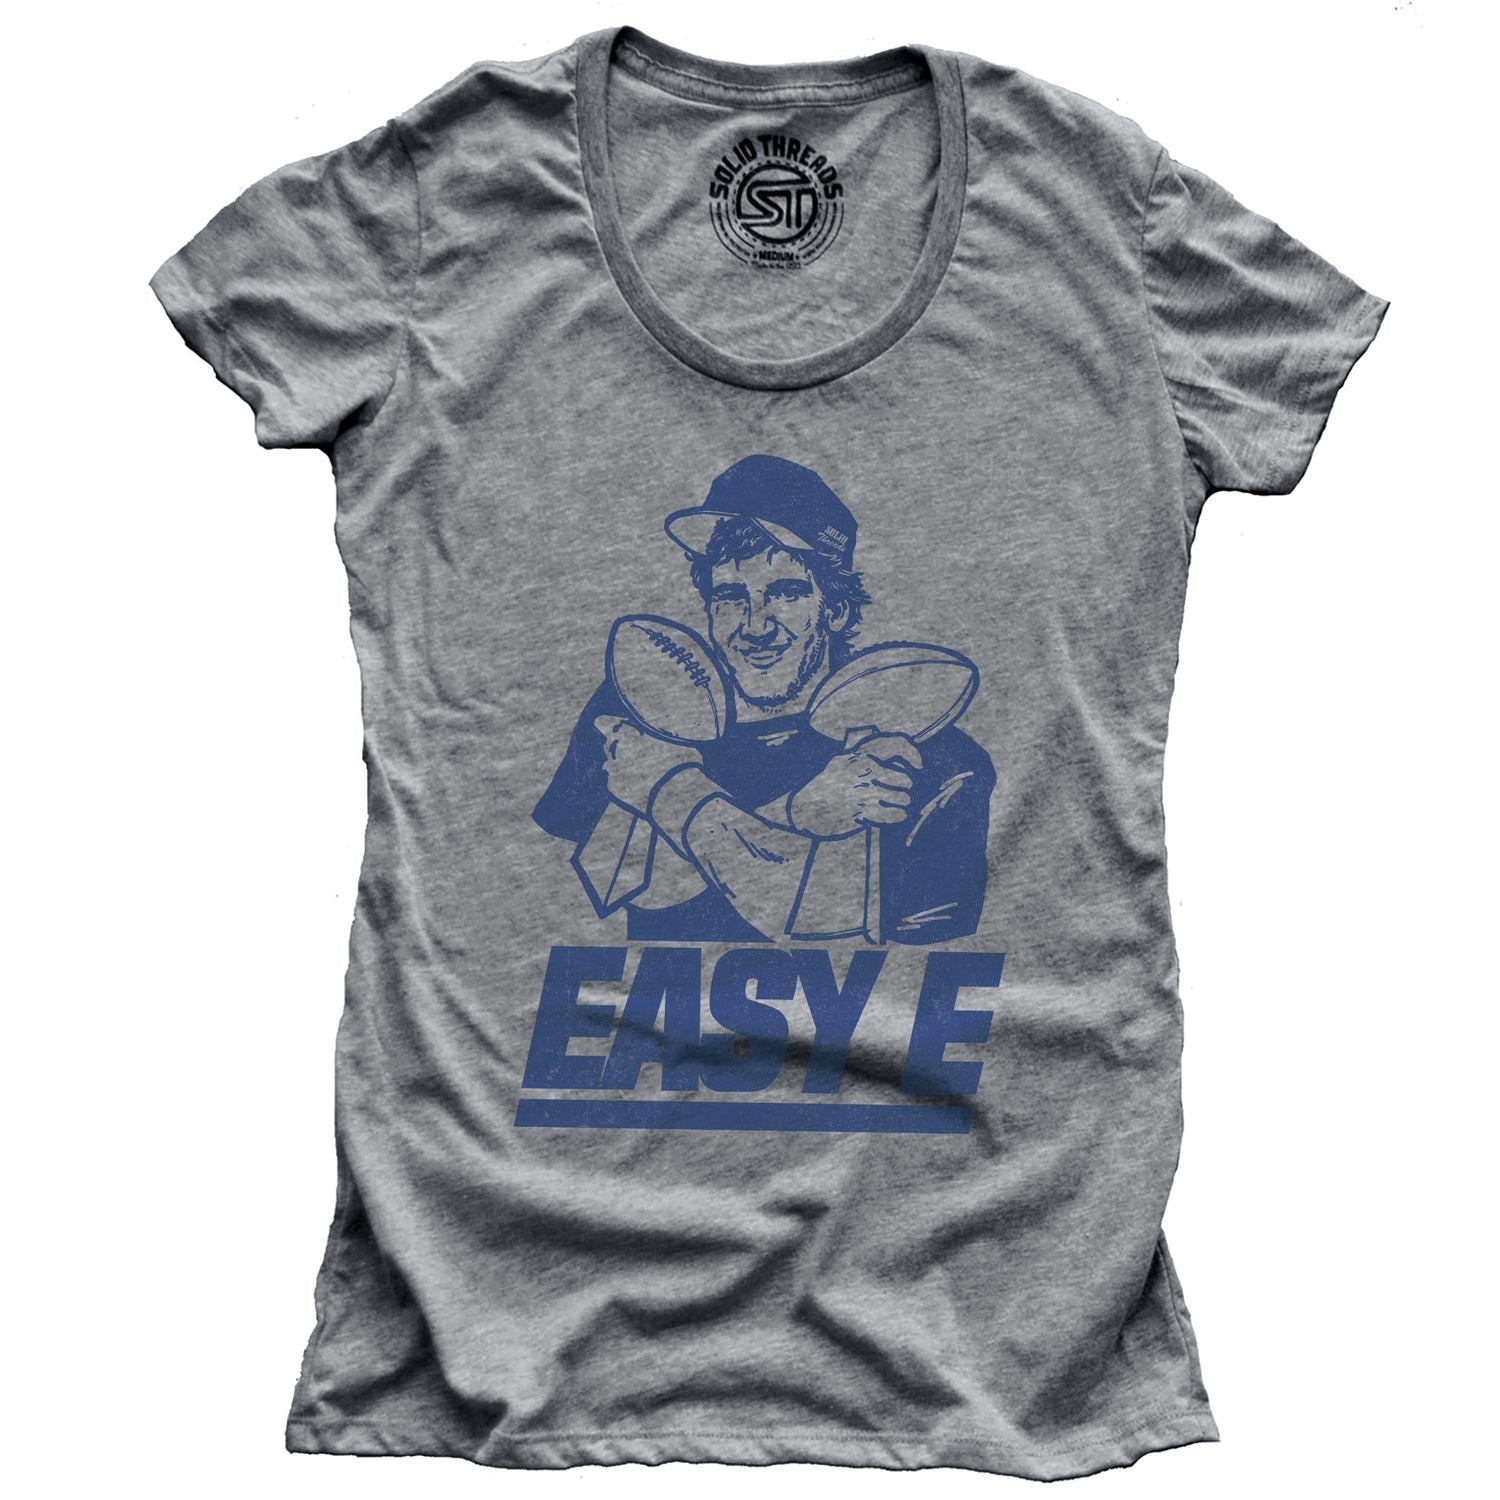 Women's Easy E Vintage Football Graphic Tee | Funny NY Giants Eli Manning T-Shirt | SOLID THREADS